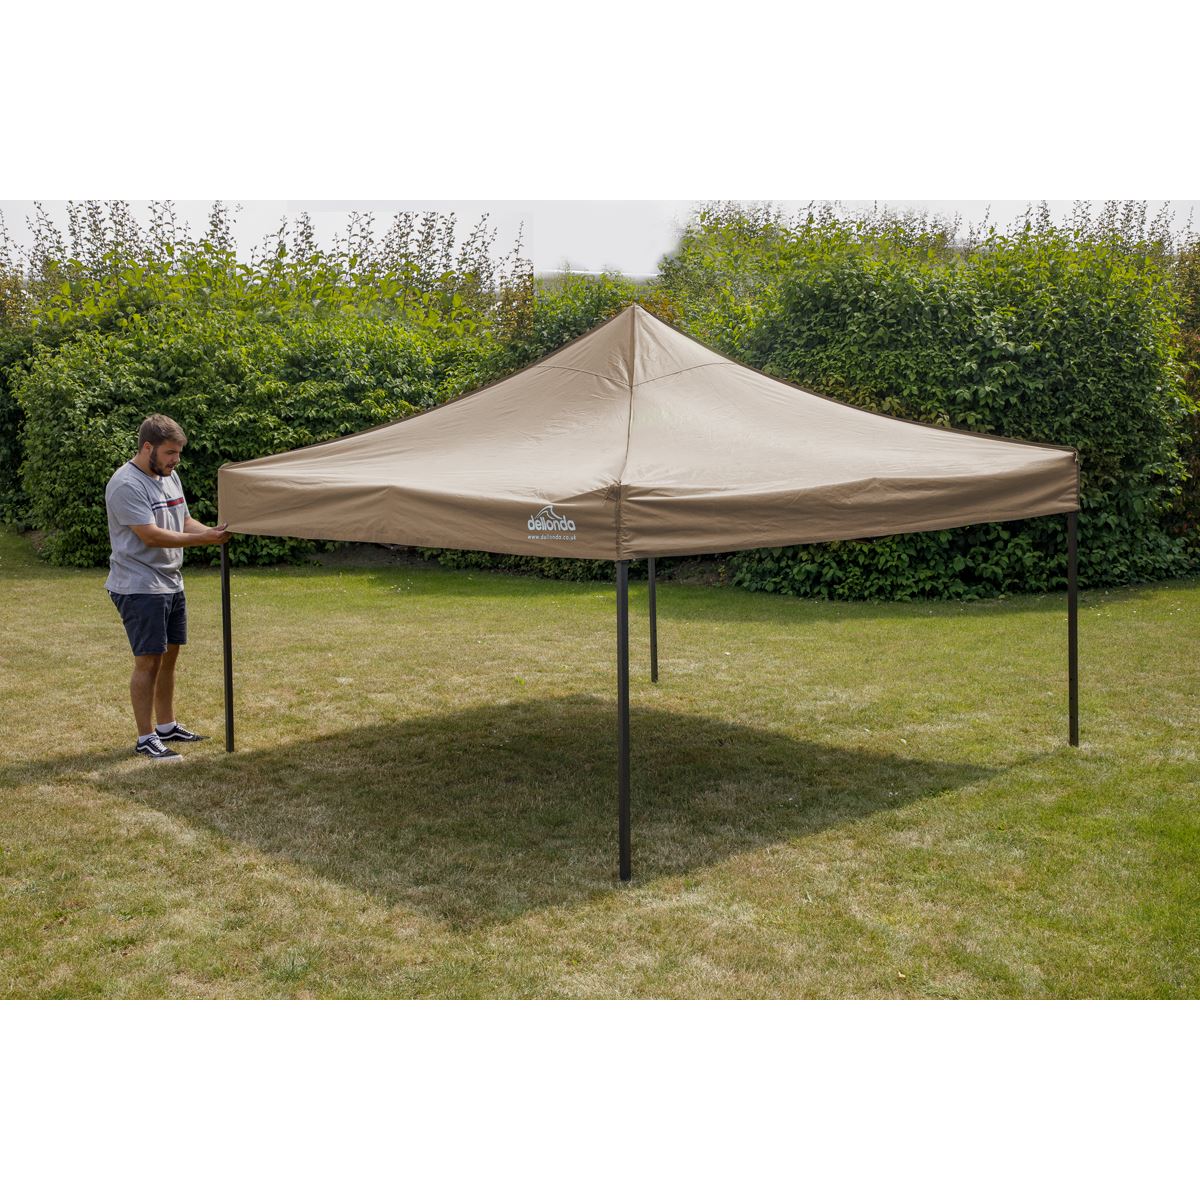 Dellonda Premium 3 x 3m Pop-Up Gazebo, PVC Coated, Water Resistant Fabric, Supplied with Carry Bag, Rope, Stakes & Weight Bags - Beige Canopy